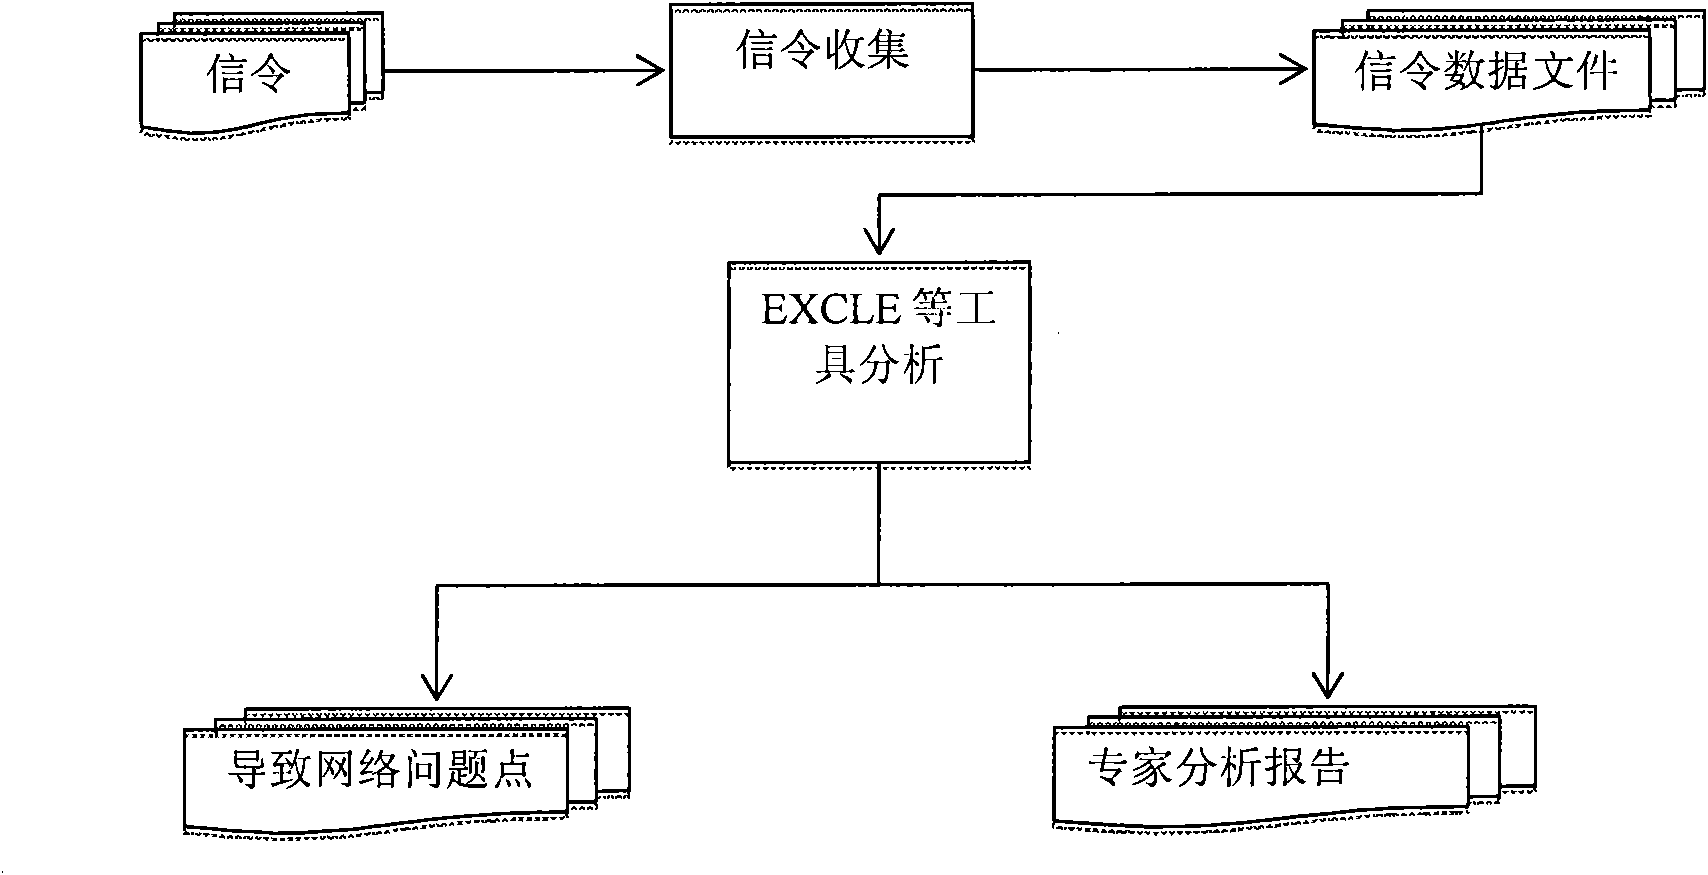 Data service flow and cell reelection-based mobile network analysis method